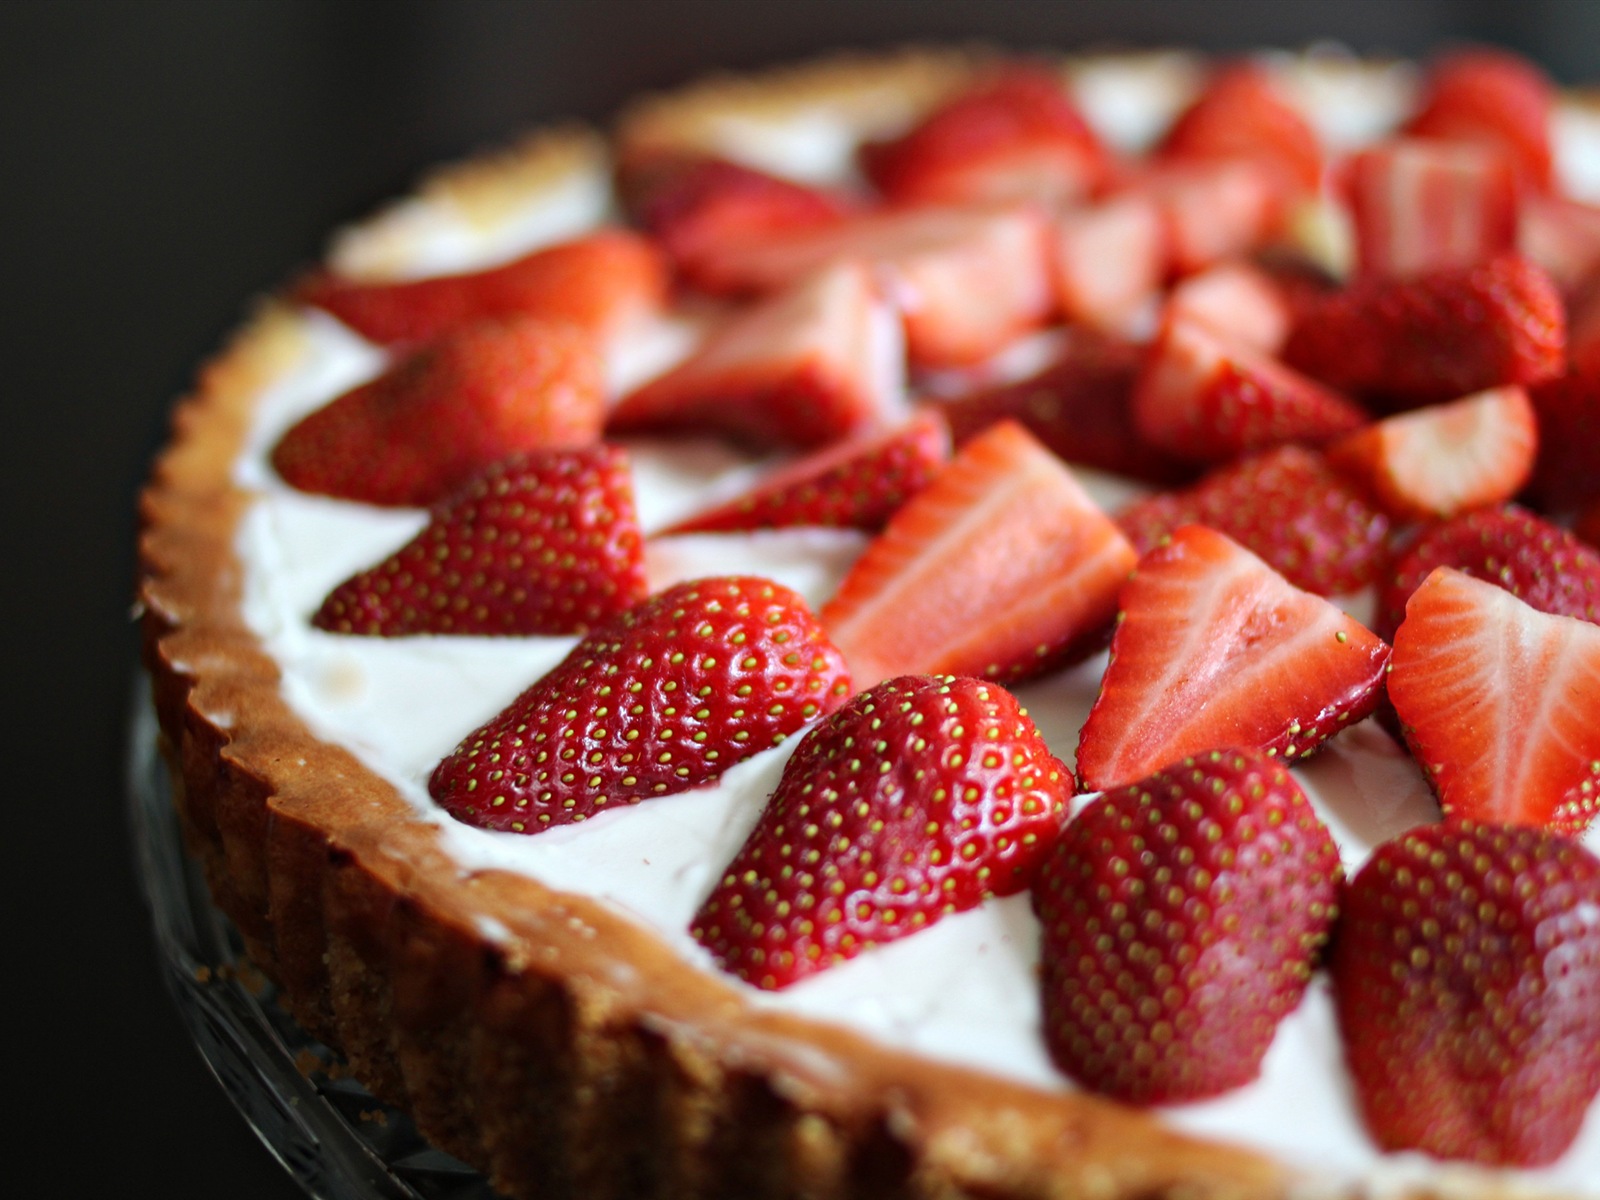 Delicious strawberry cake HD wallpapers #4 - 1600x1200